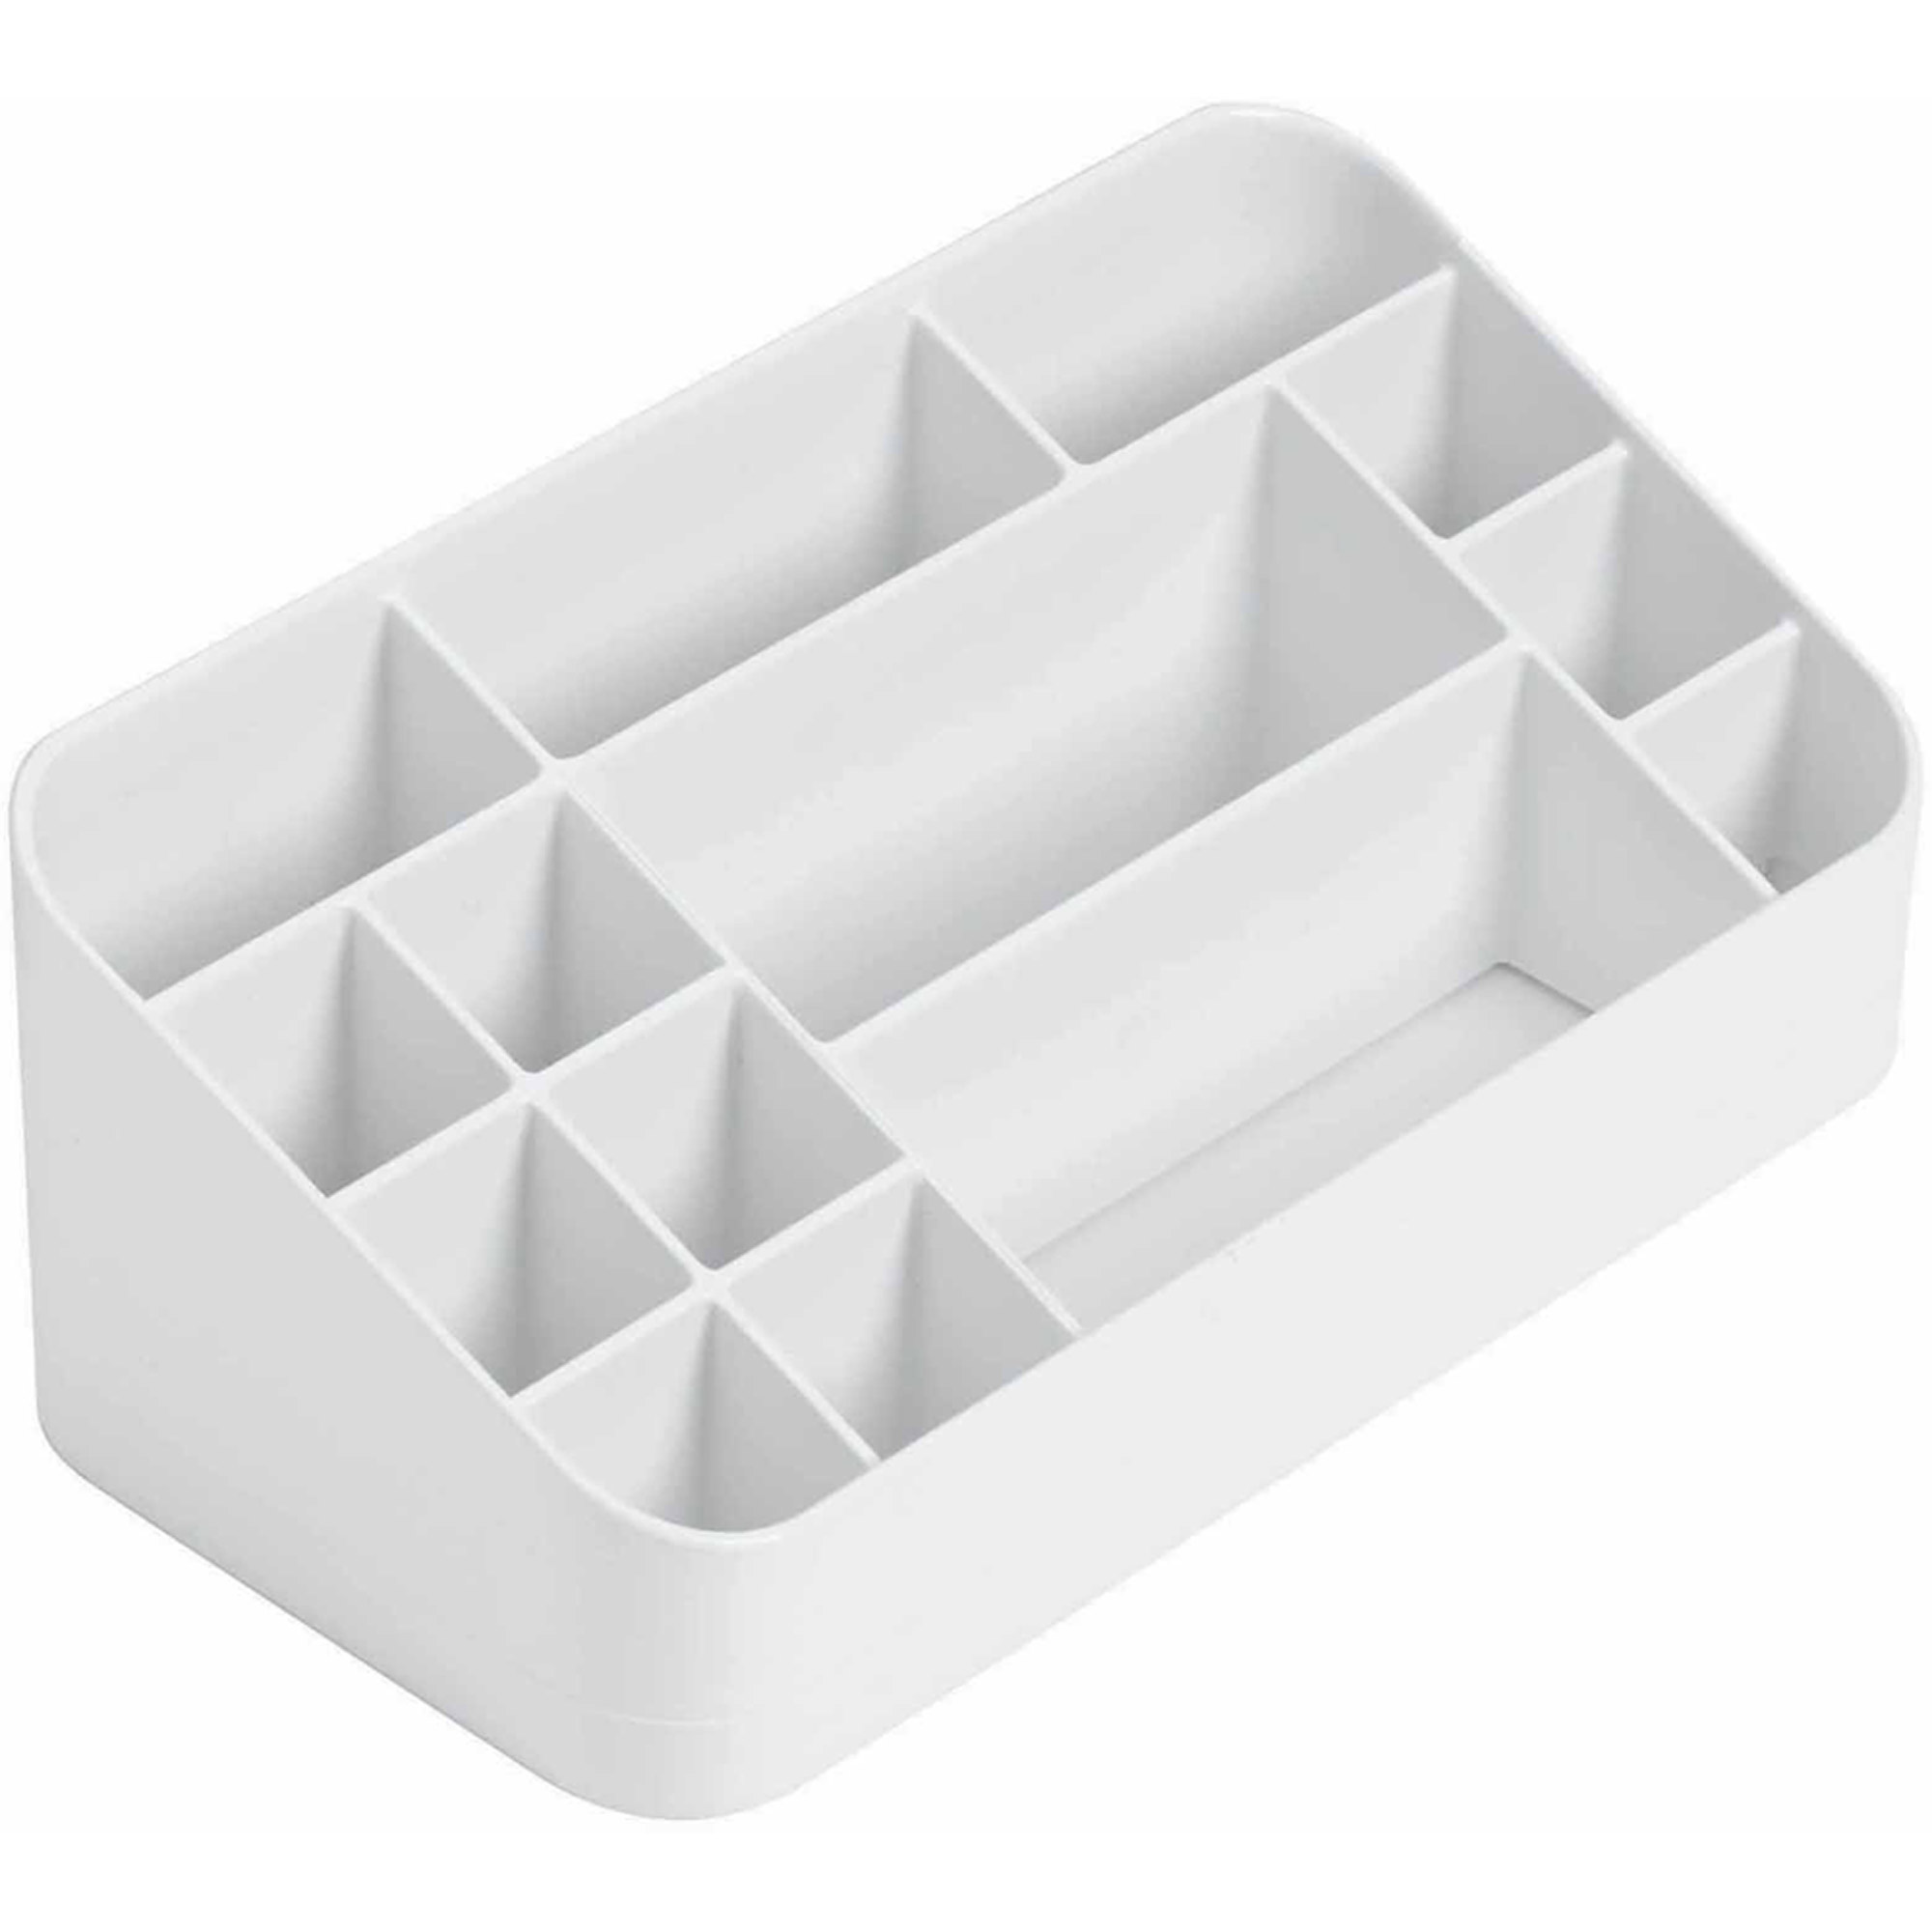 iDesign Clarity Cosmetic Organizer for Vanity Cabinet to Hold Makeup, Beauty Products, Lip Sticks, White - image 3 of 6